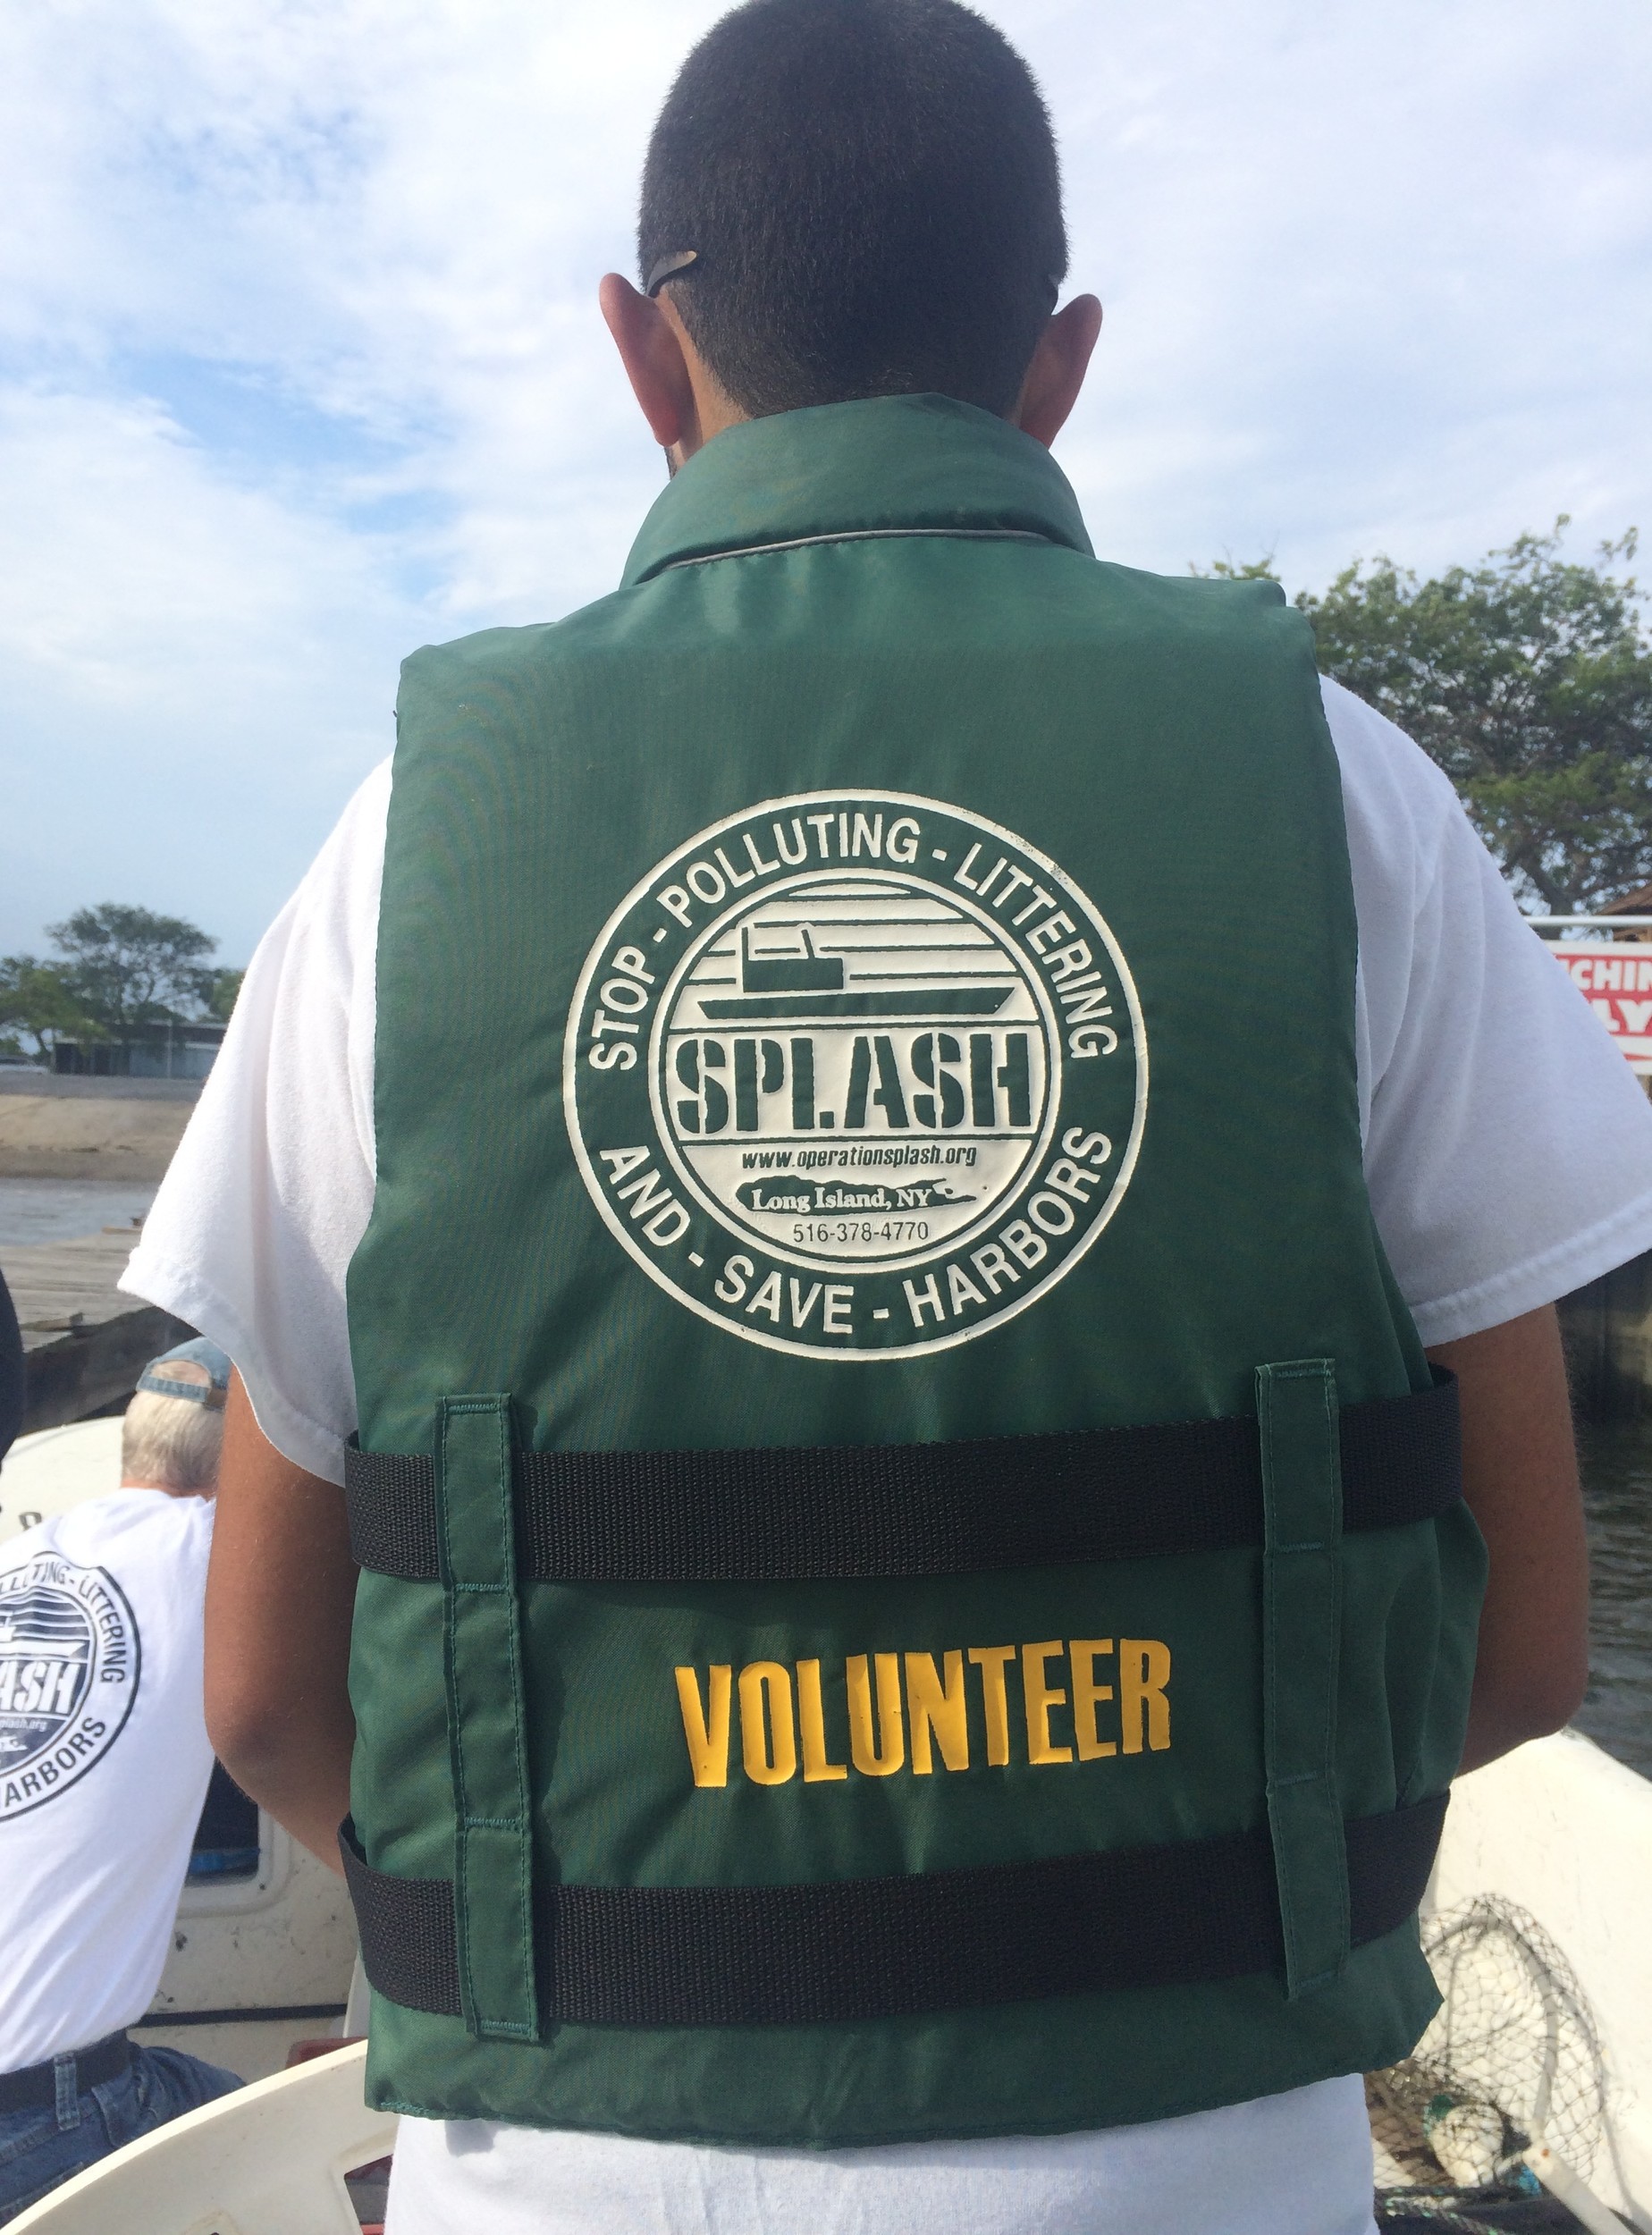 Volunteers for Operation SPLASH come from all over to help clean up the bays.